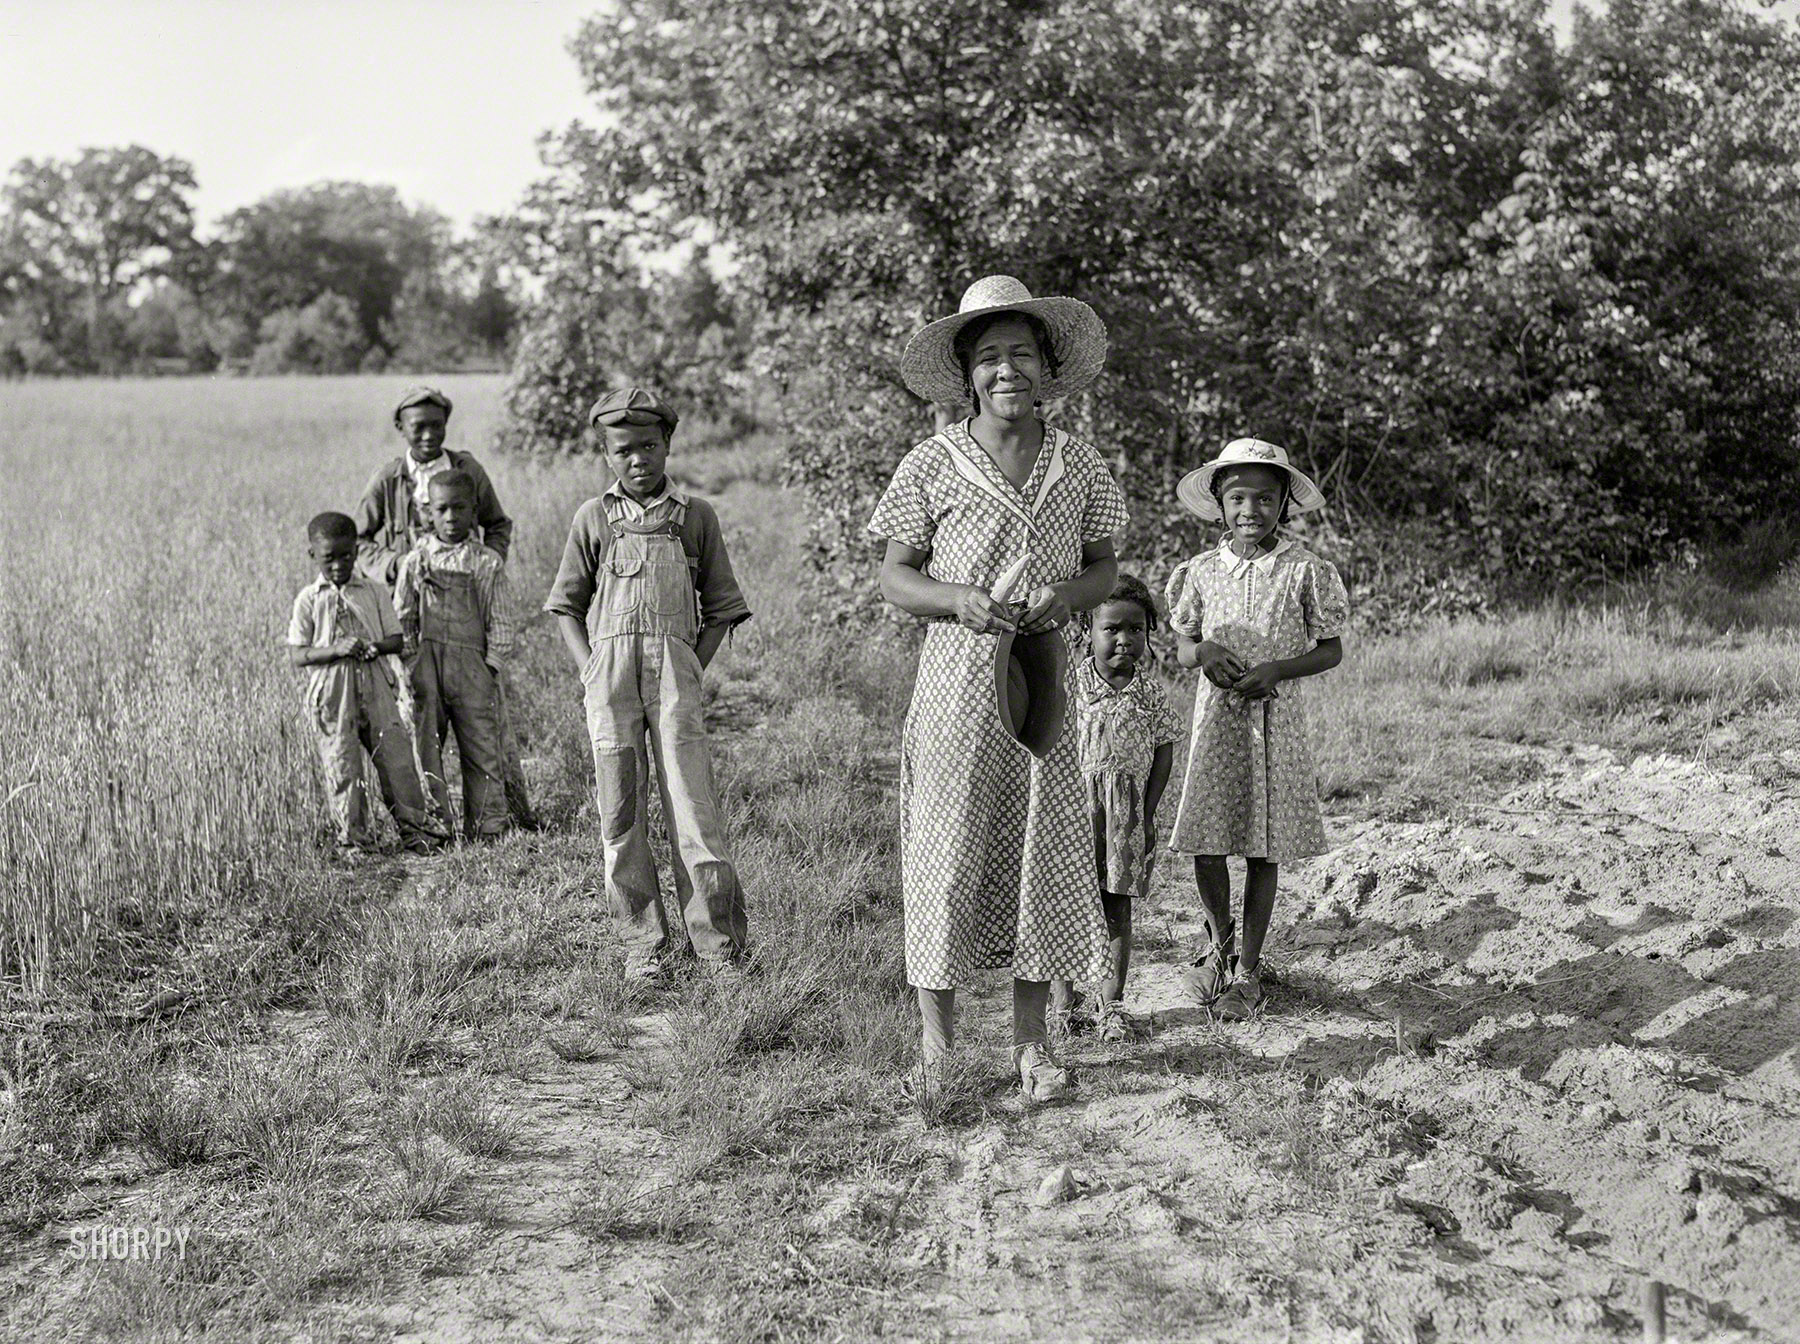 May 1940. "Negro tobacco planter's family. The three children in the background are those of a neighbor. Near Farrington, Chatham County, North Carolina." Photo by Jack Delano for the Farm Security Administration. View full size.